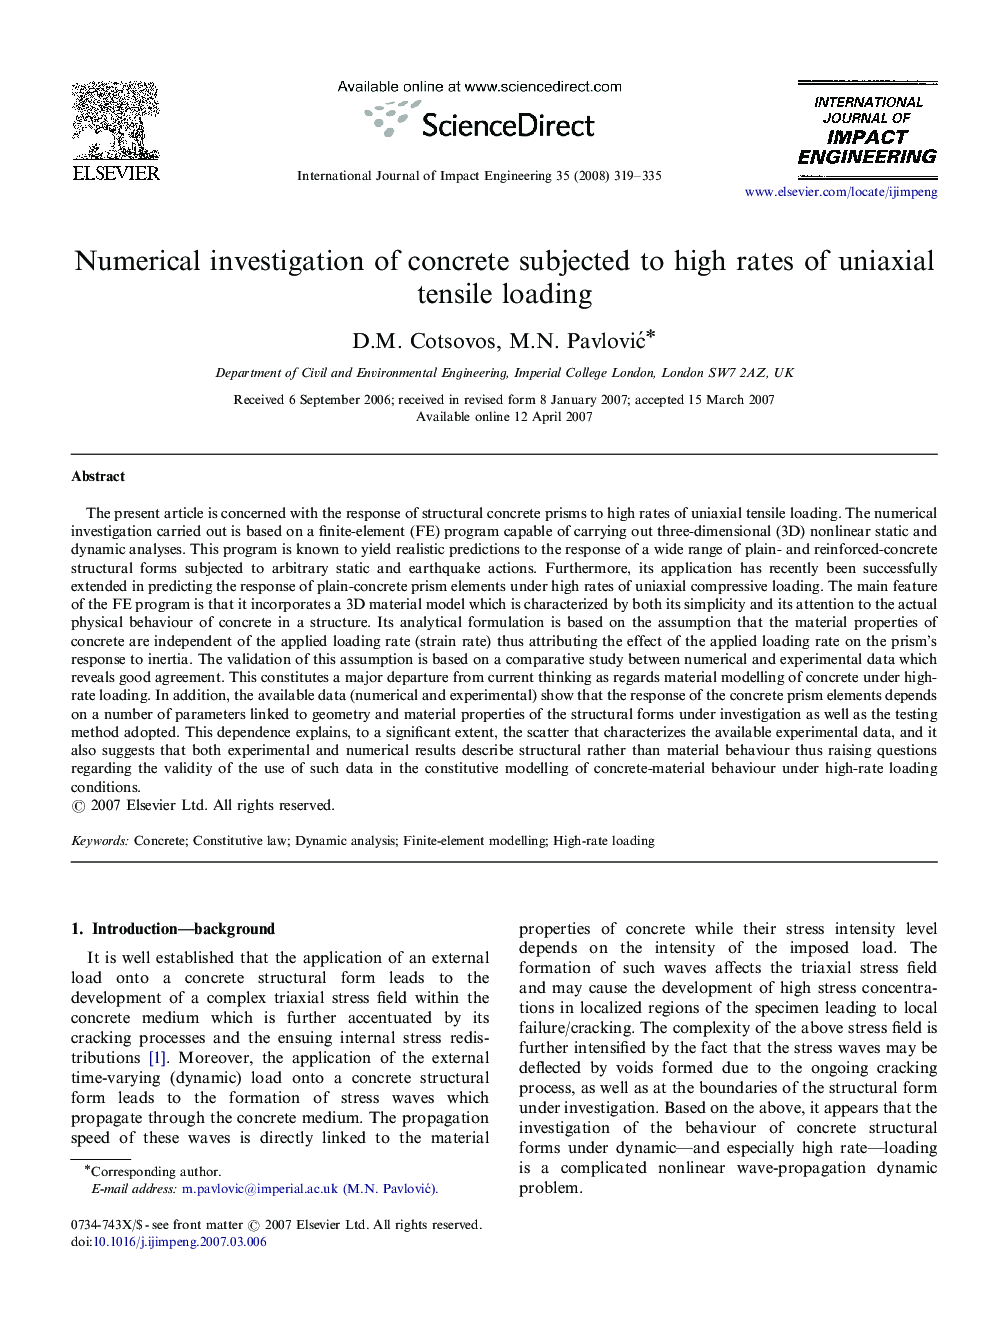 Numerical investigation of concrete subjected to high rates of uniaxial tensile loading